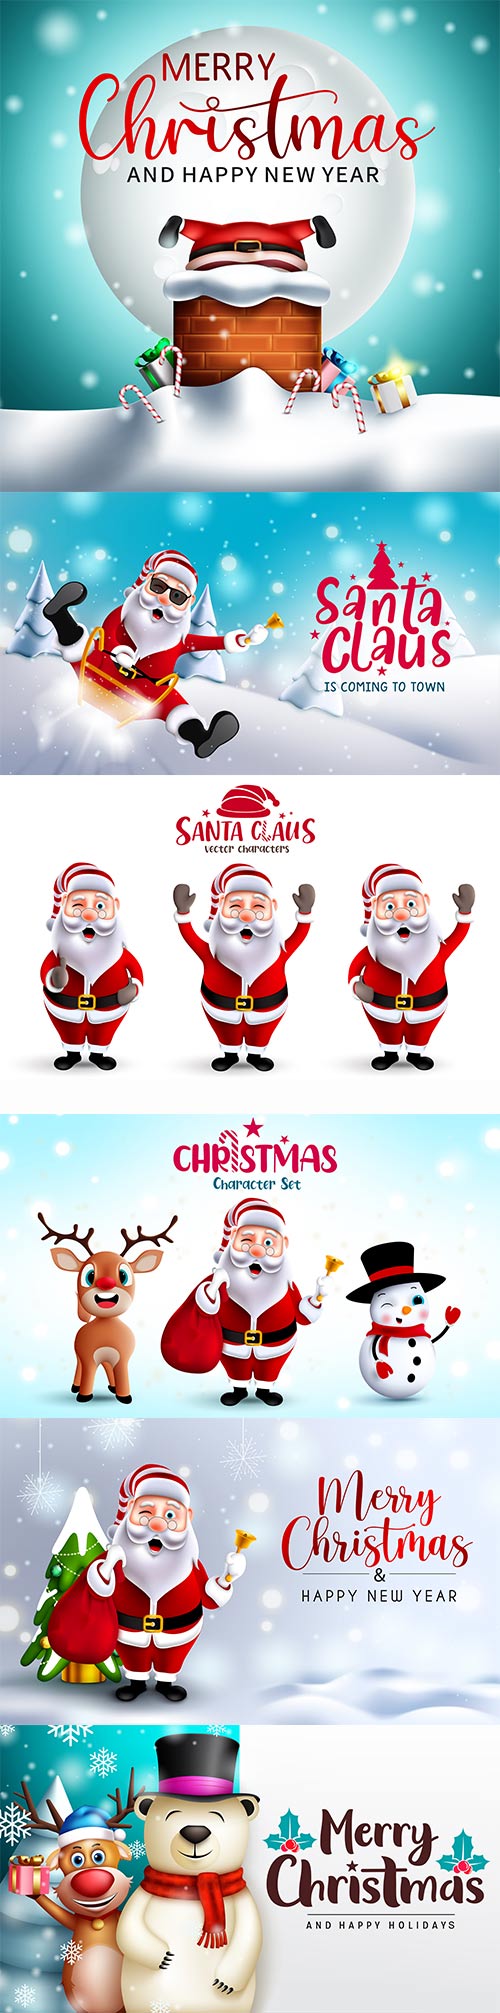 Merry christmas greeting vector background merry christmas with Santa